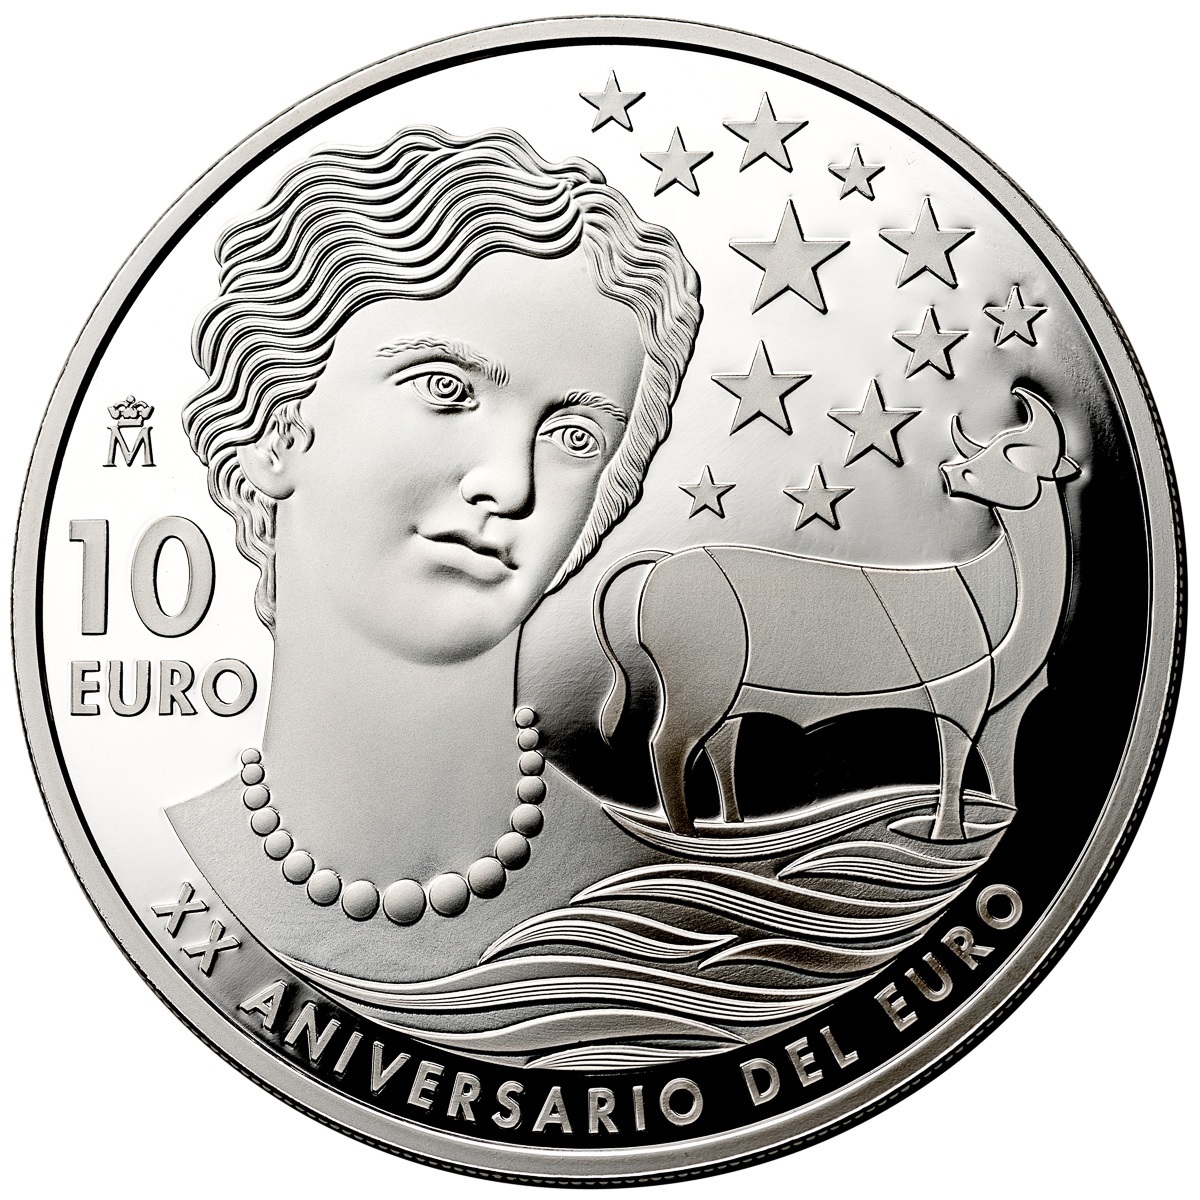 (EUR05.Proof.2022.92927006) 10 euro Spain 2022 Proof silver - 20 years of euro cash Reverse (zoom)